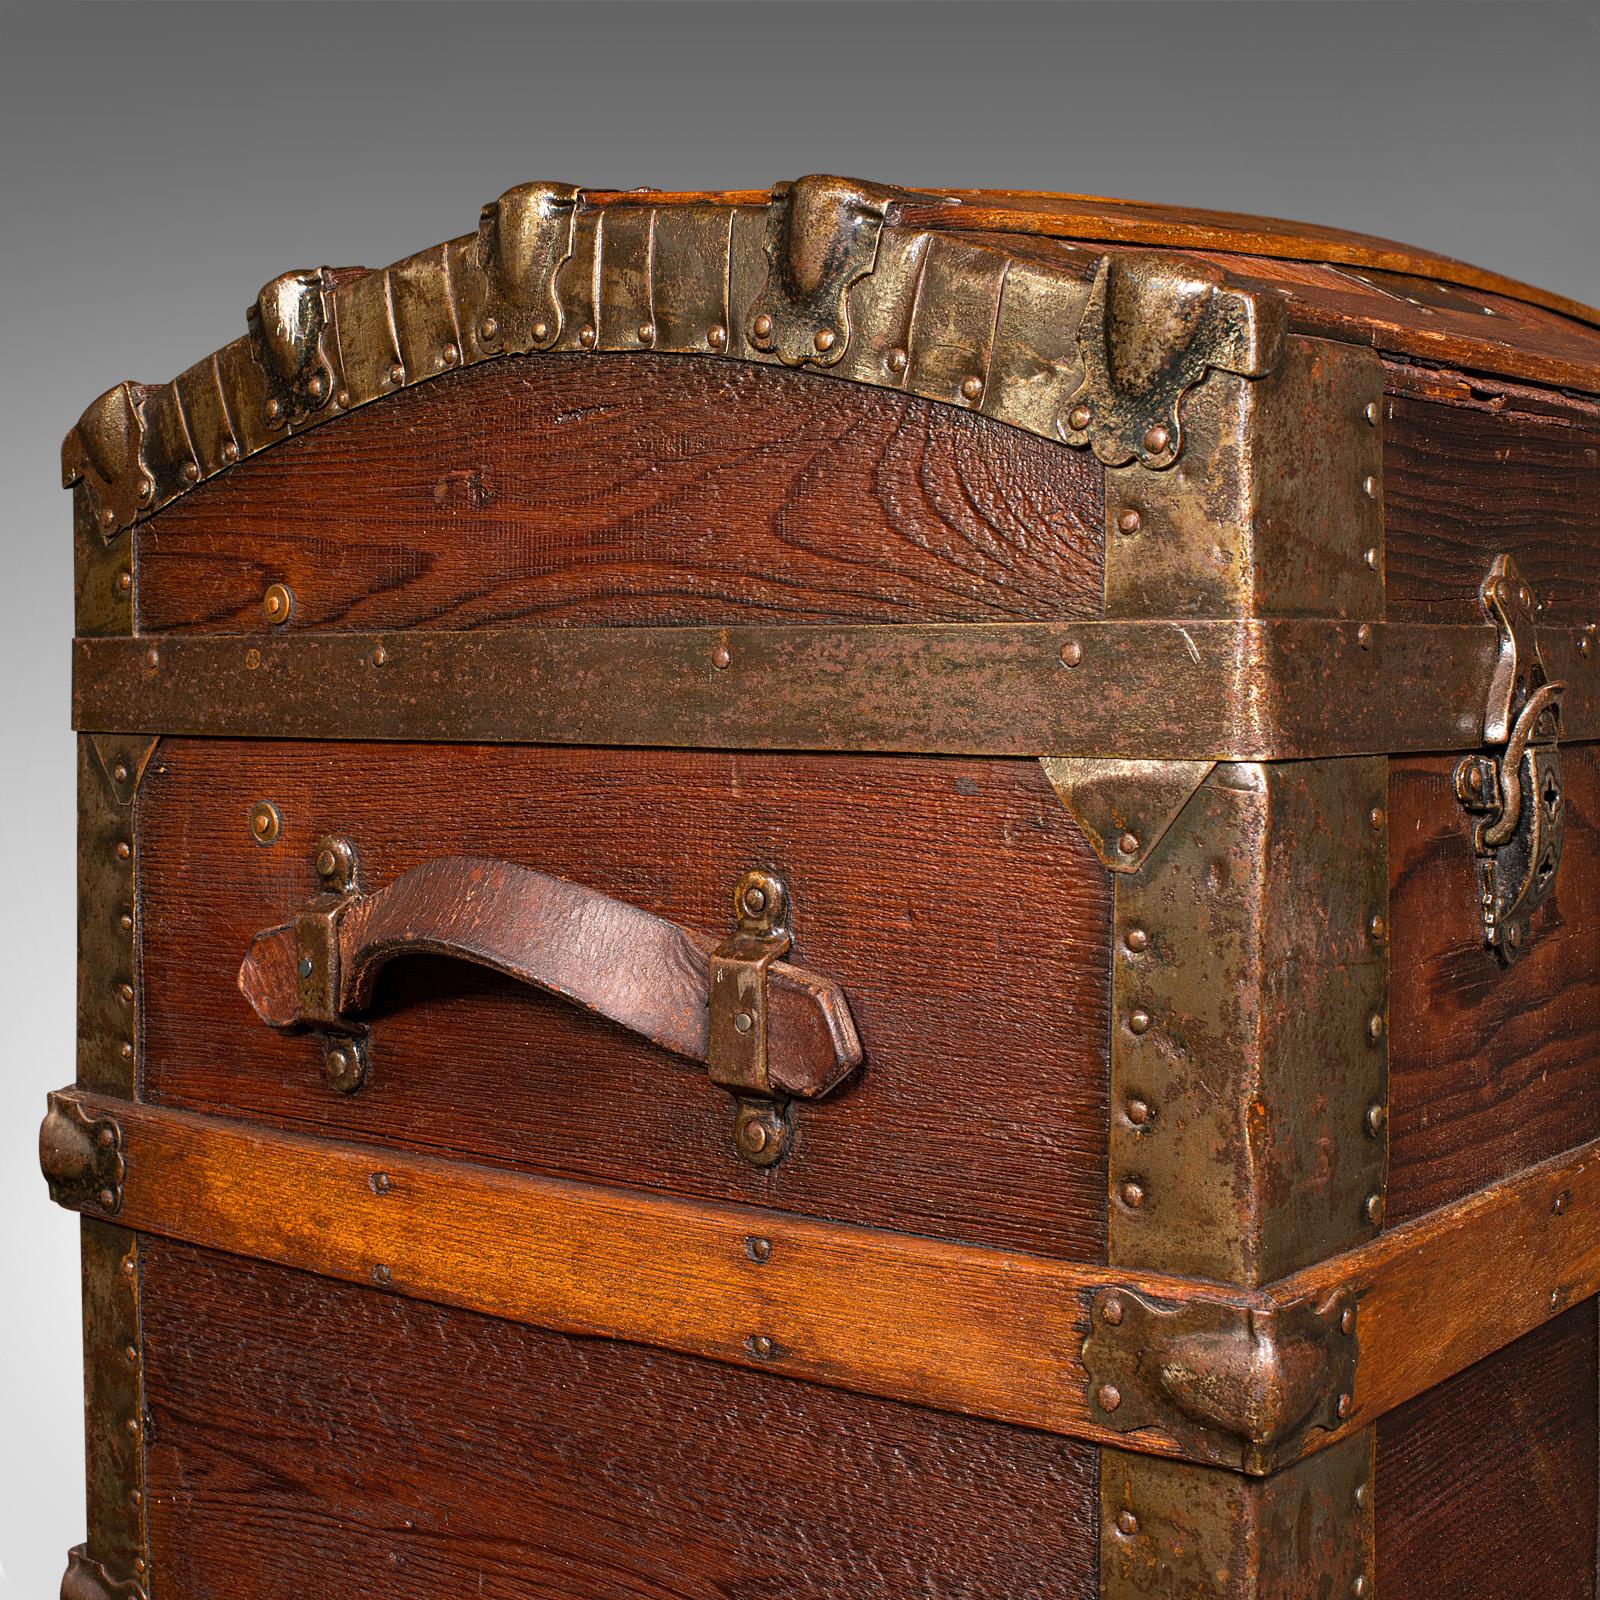 Antique Dome Topped Chest, English, Pine, Shipping Trunk, Victorian, Circa 1870 4